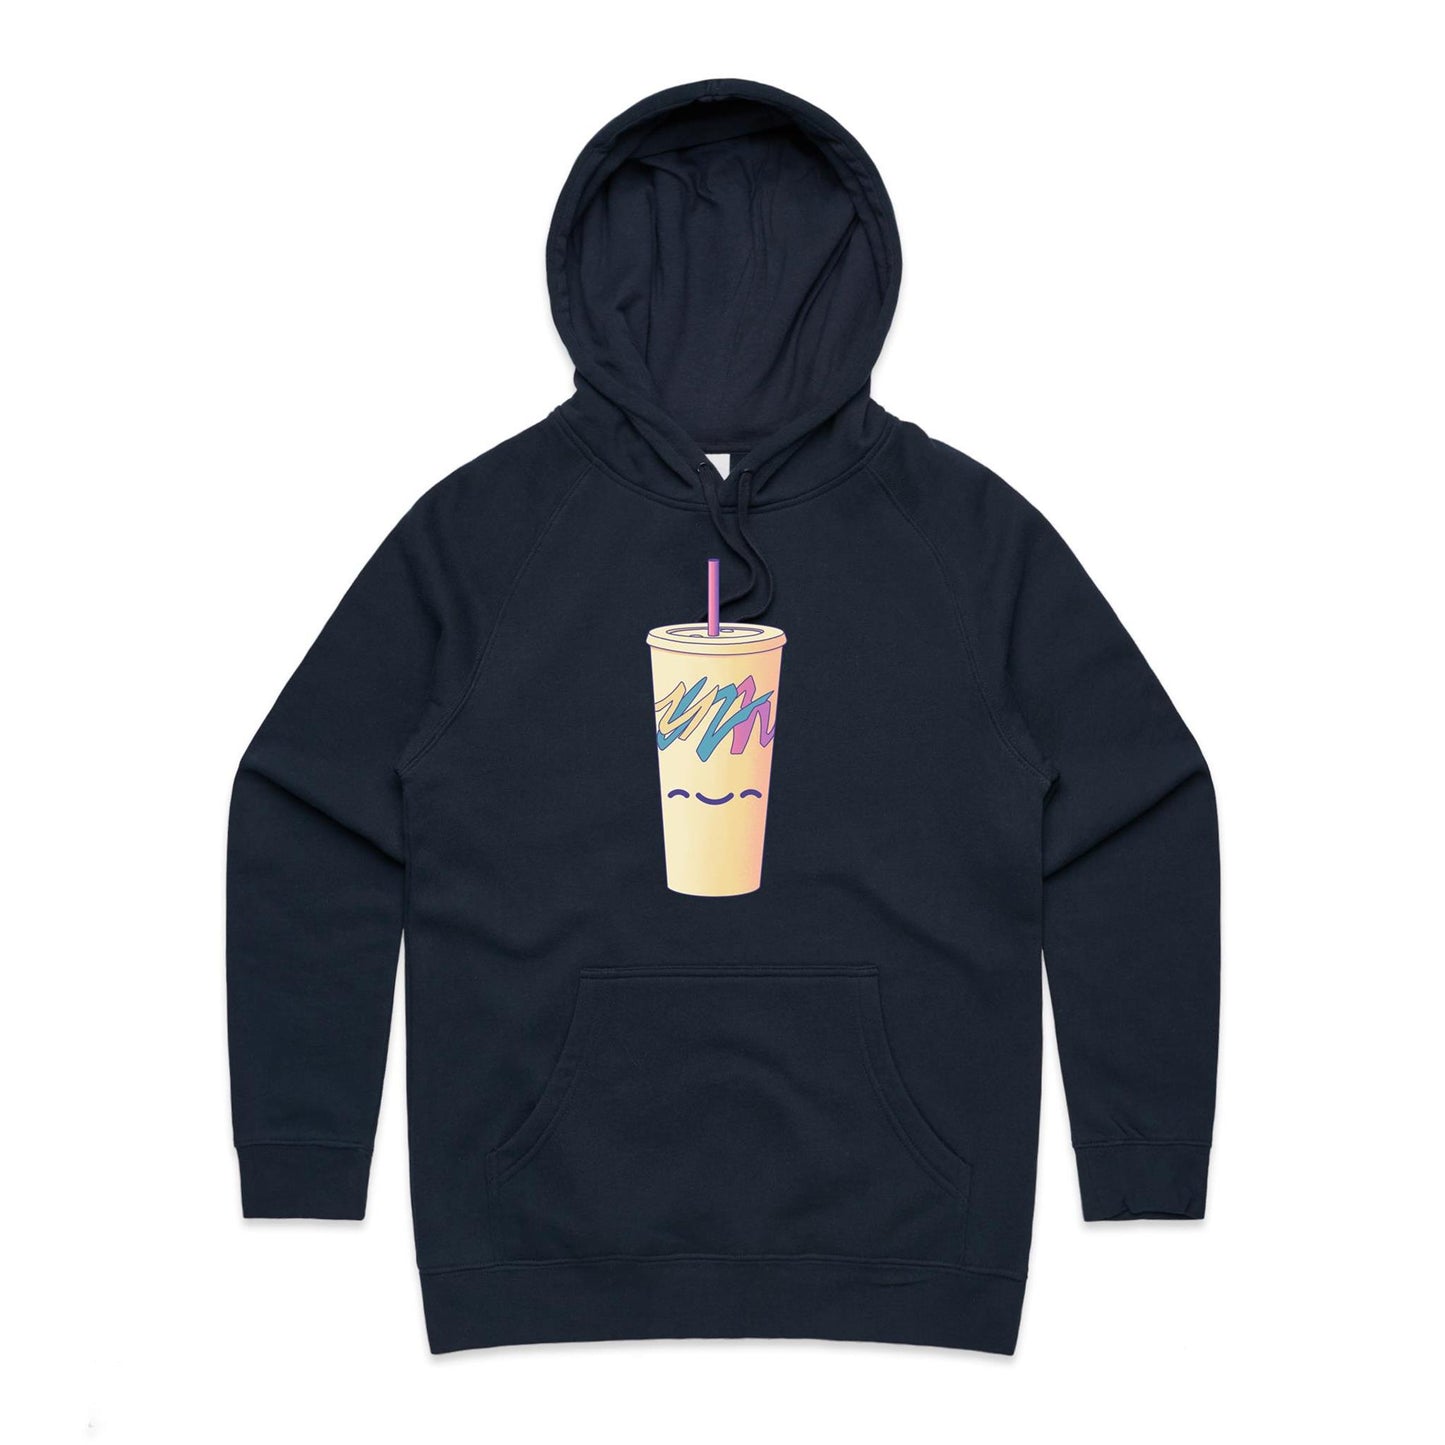 Running Cup That Hill - Women's Hoodie